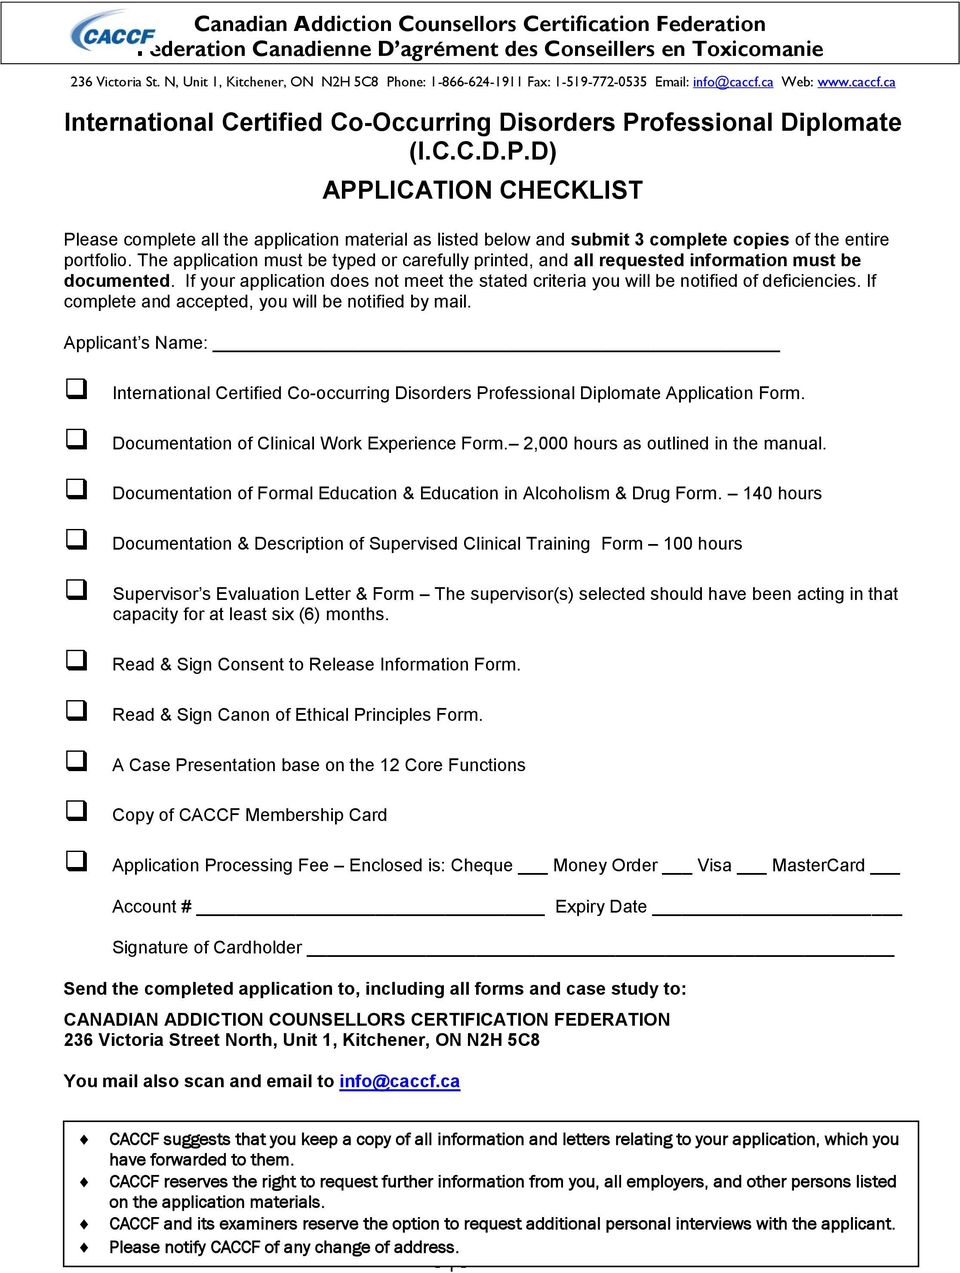 If complete and accepted, you will be notified by mail. Applicant s Name: International Certified Co-occurring Disorders Professional Diplomate Application Form.